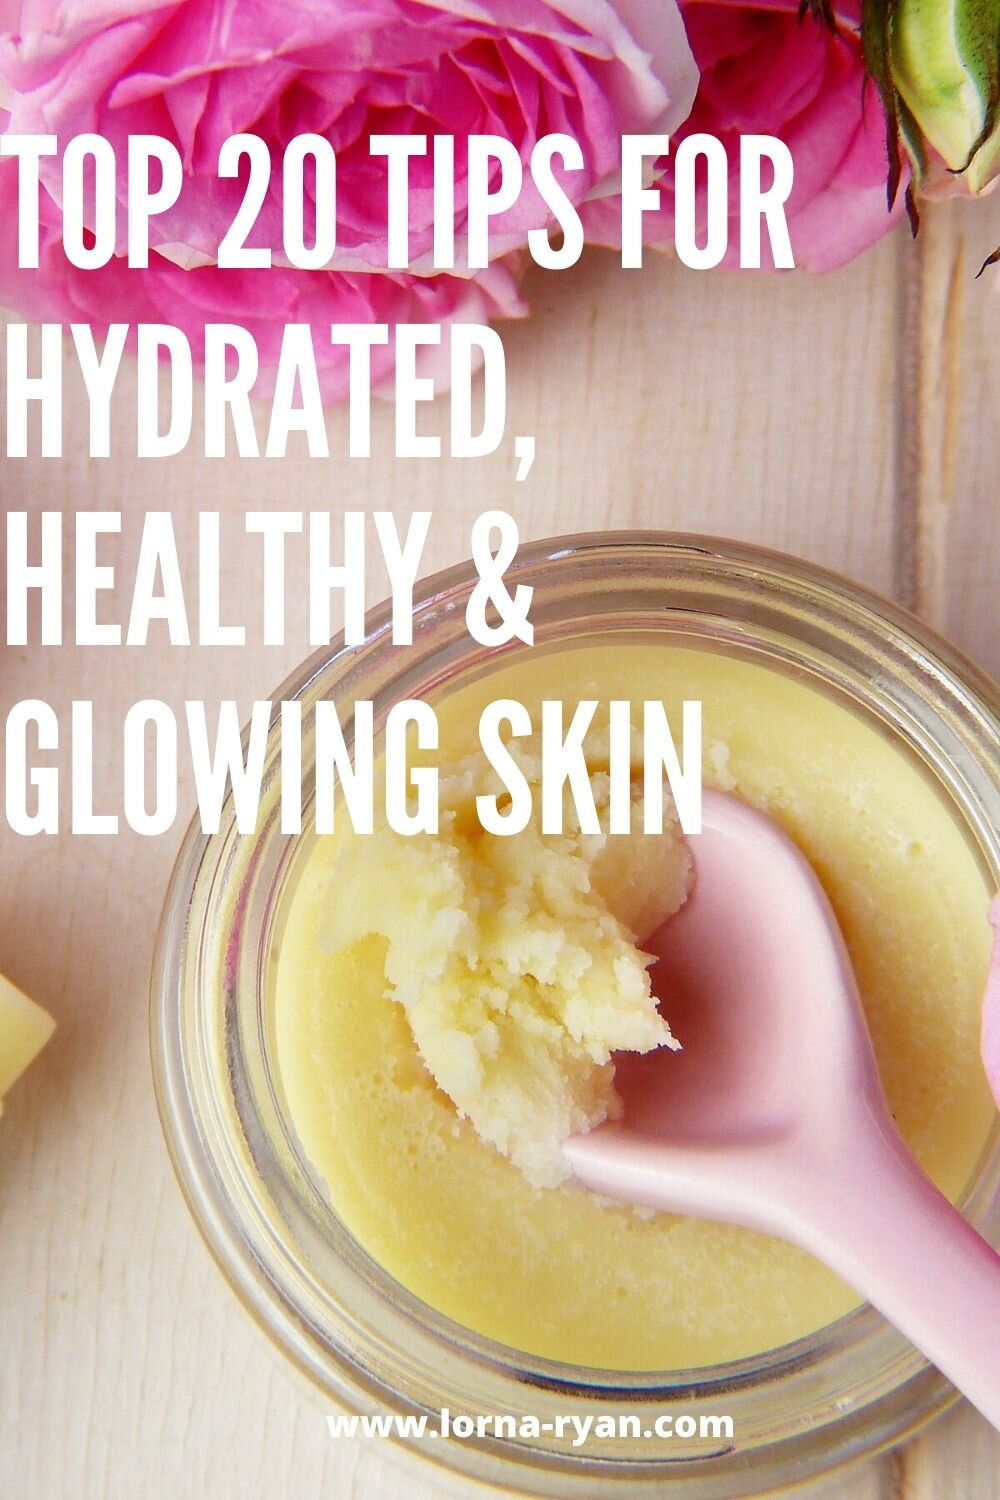 How to have clear skin. If you're looking for tips on how to have a clear healthy skin, look no further, this post is packed with massive value for people like you. Start reading!